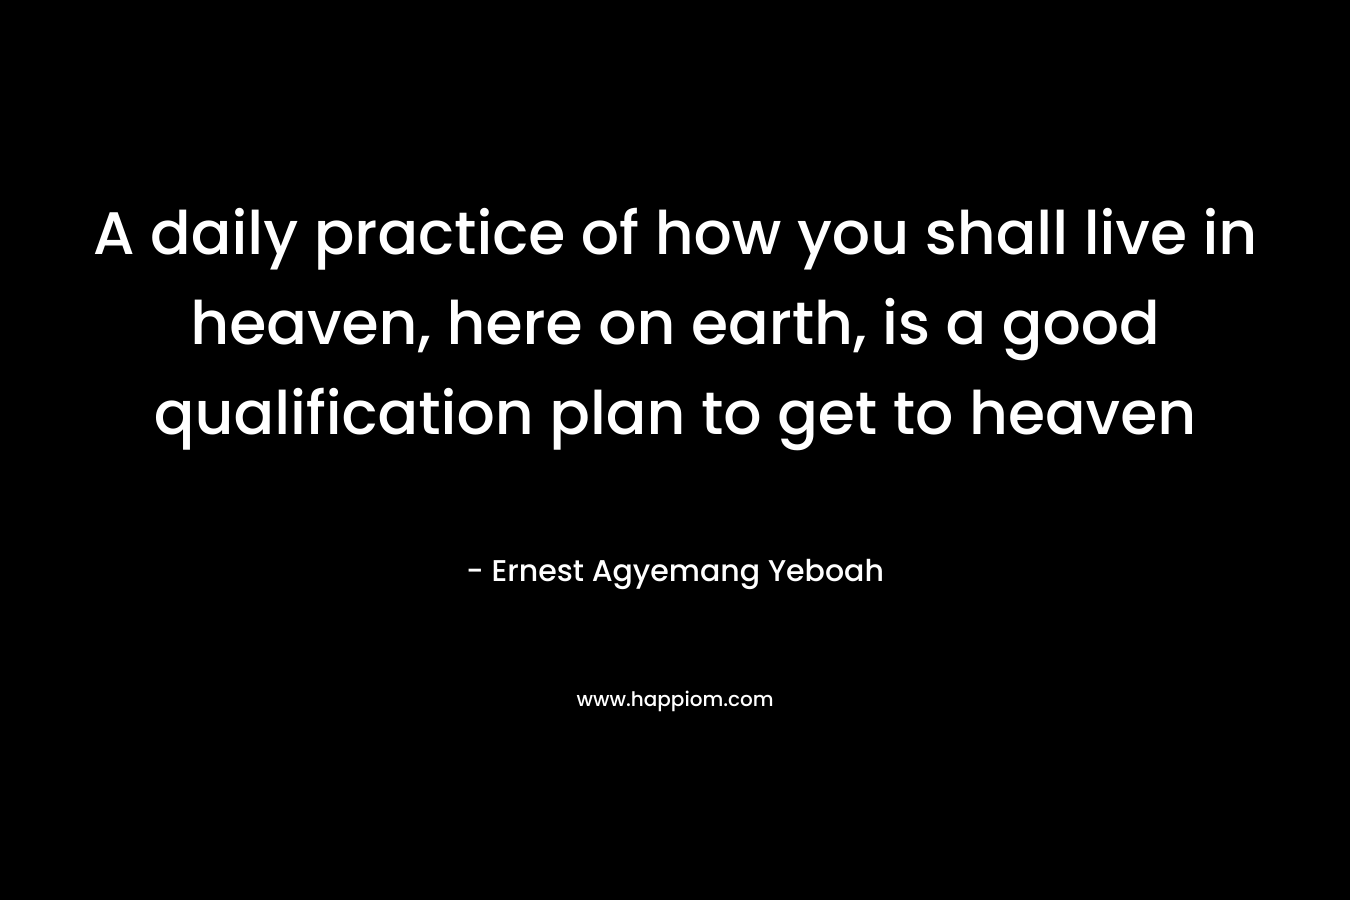 A daily practice of how you shall live in heaven, here on earth, is a good qualification plan to get to heaven